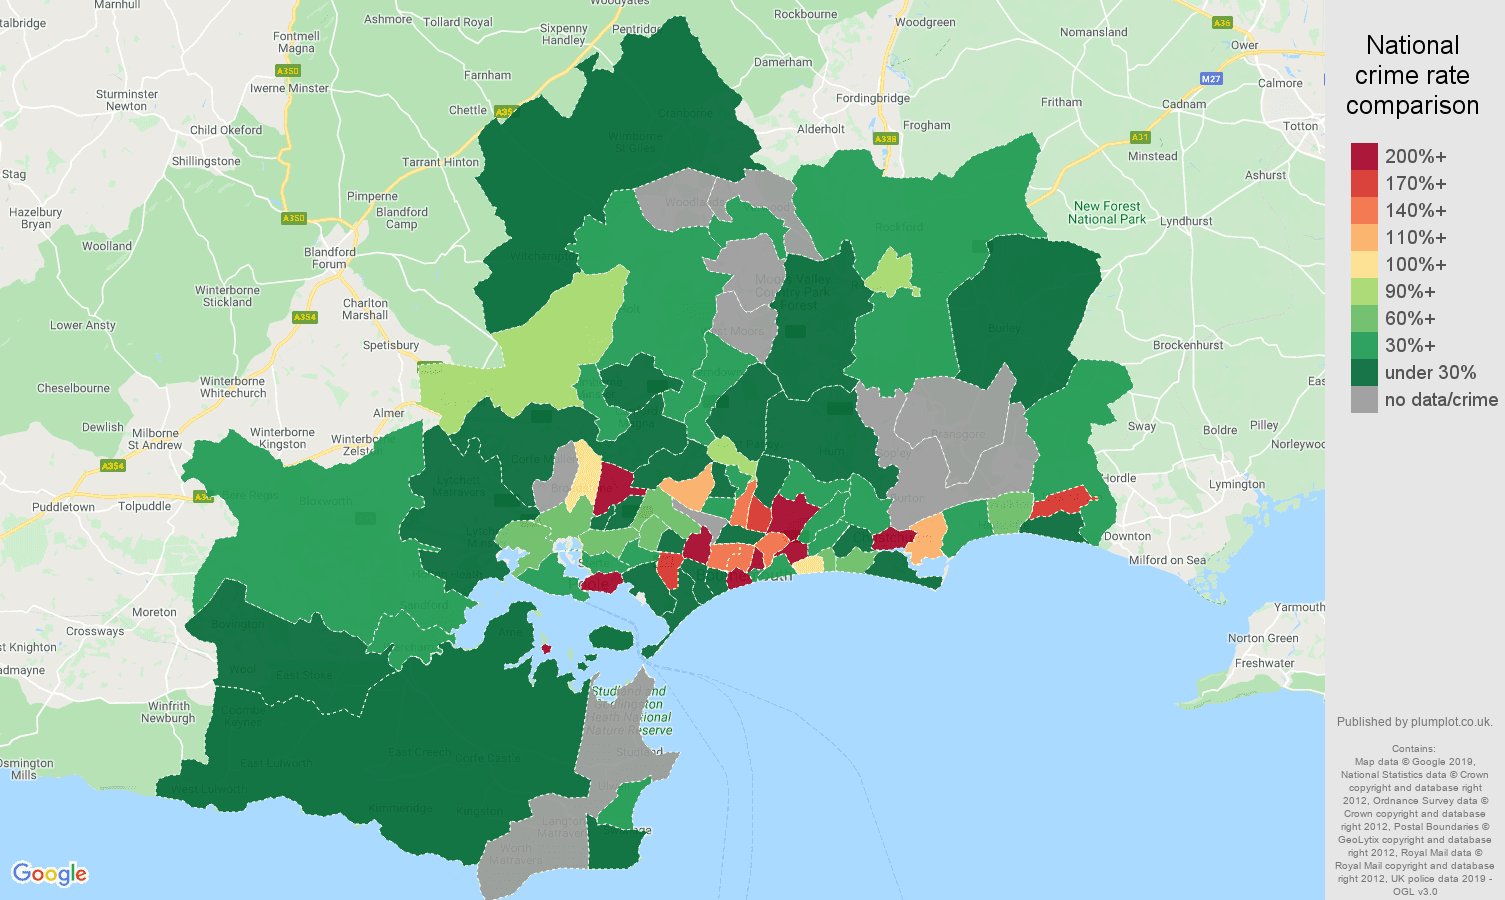 Bournemouth shoplifting crime rate comparison map